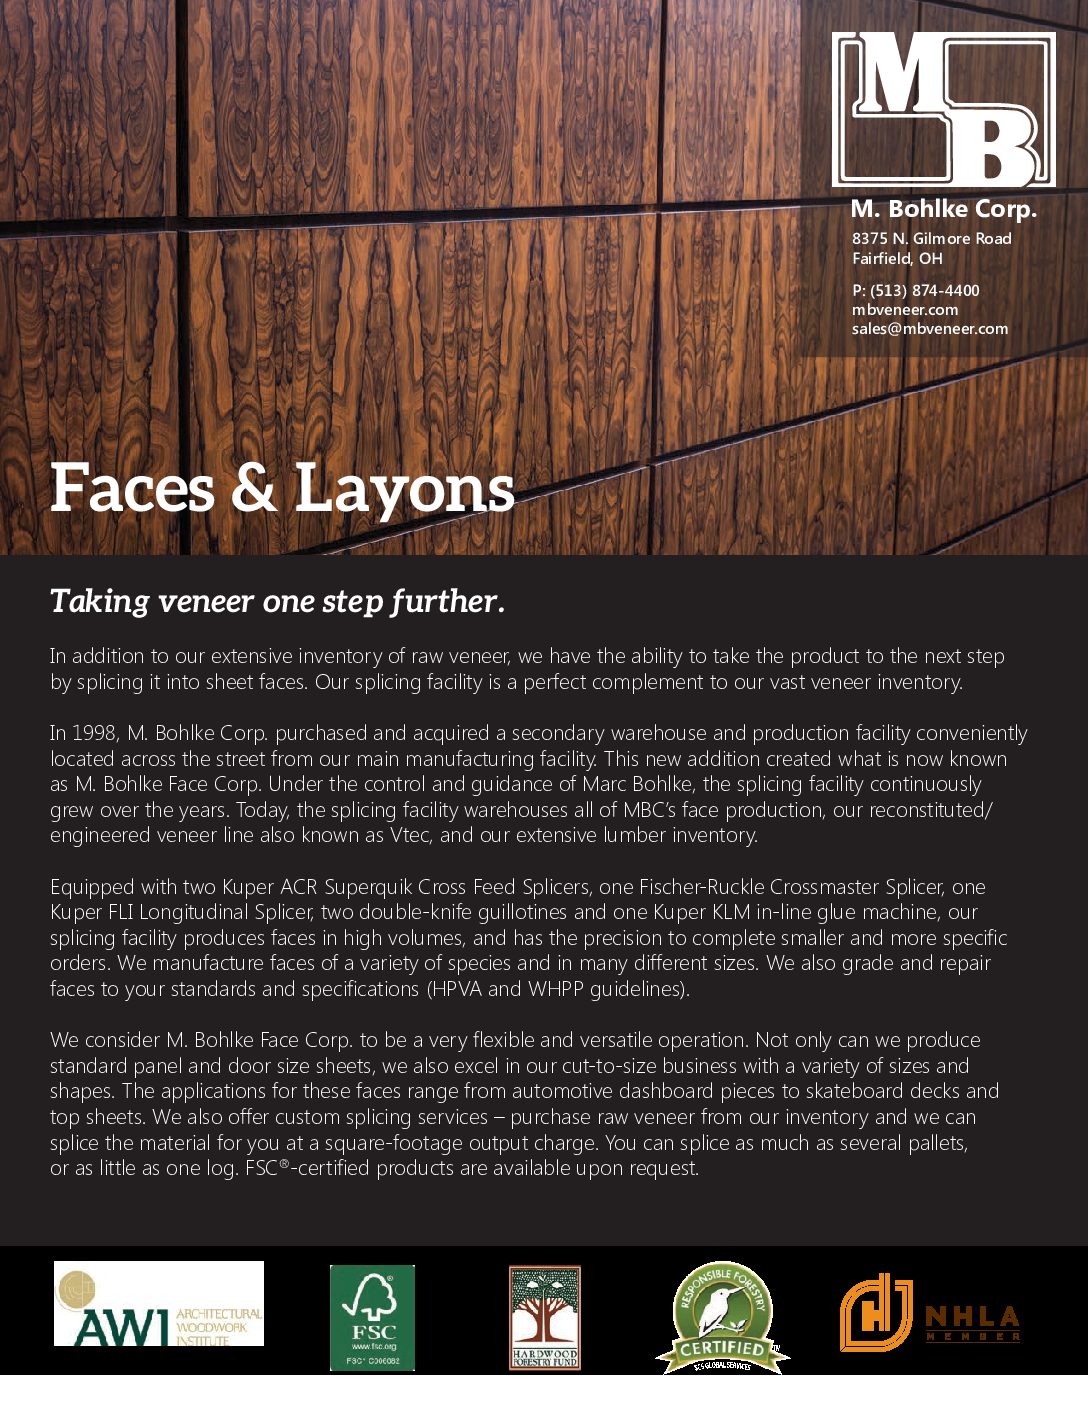 Faces & Layons Bohlke Flier.